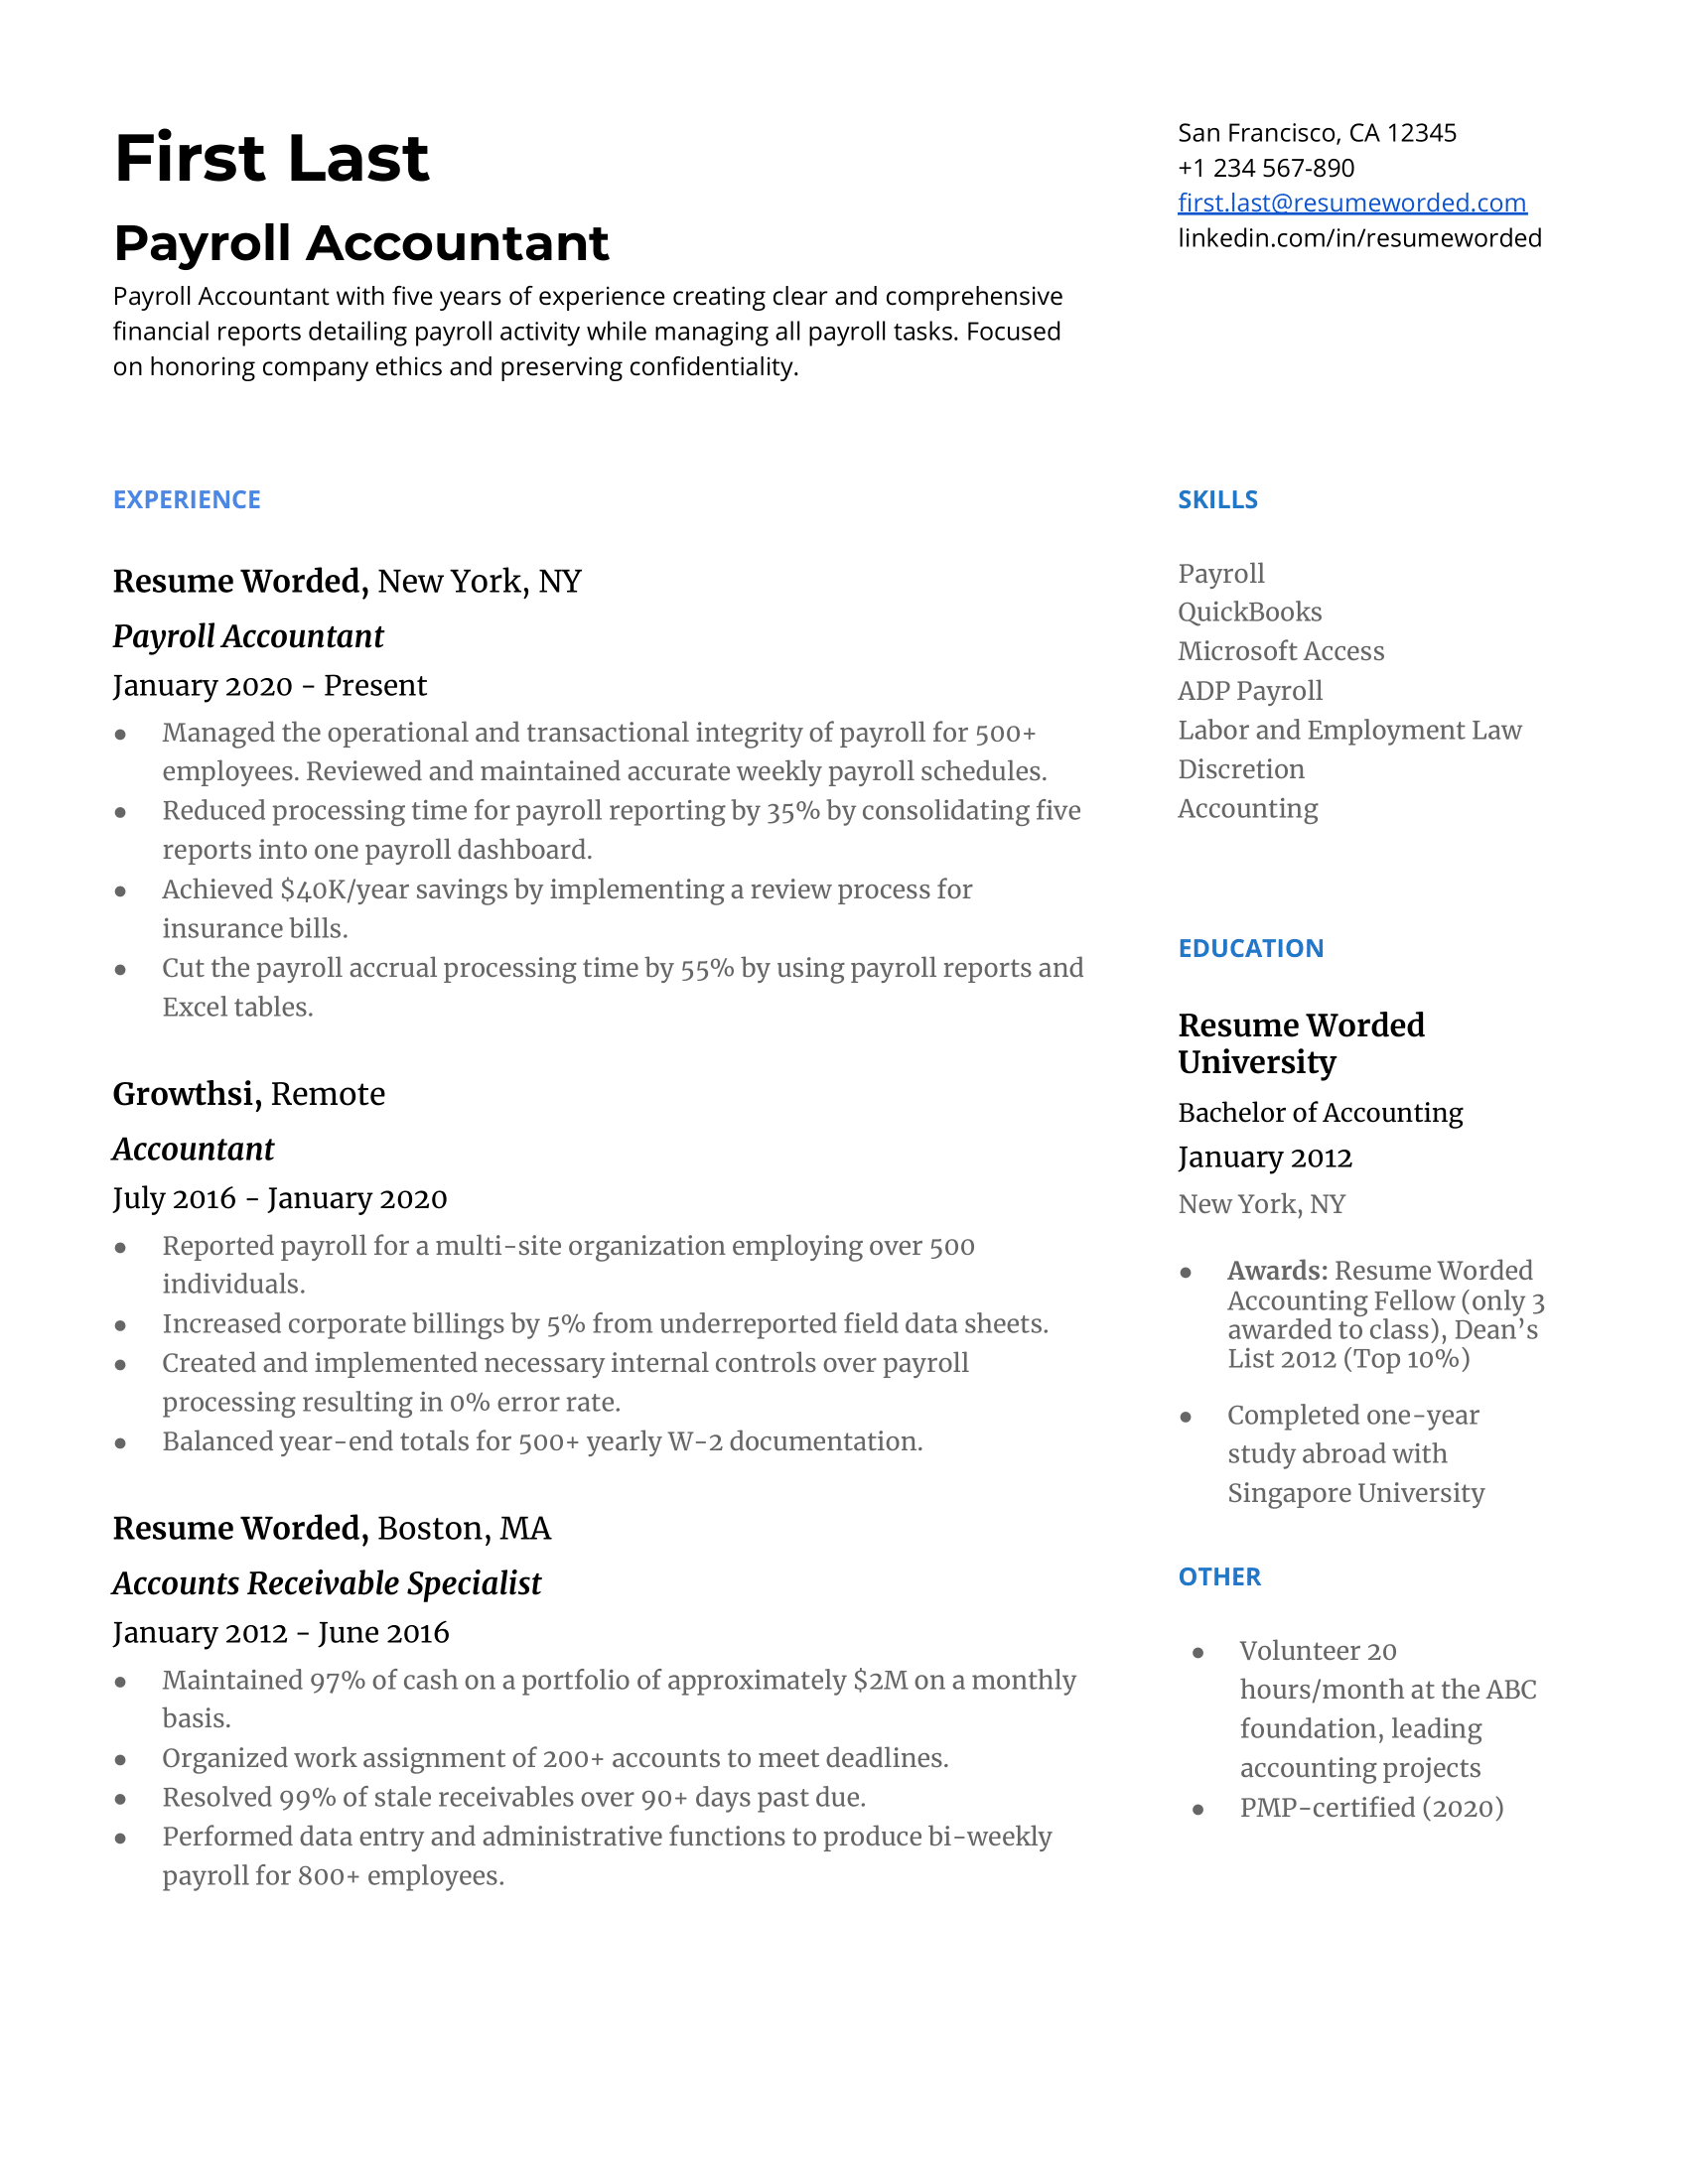 Payroll accountant resume with hard skills, job title, and relevant keywords added